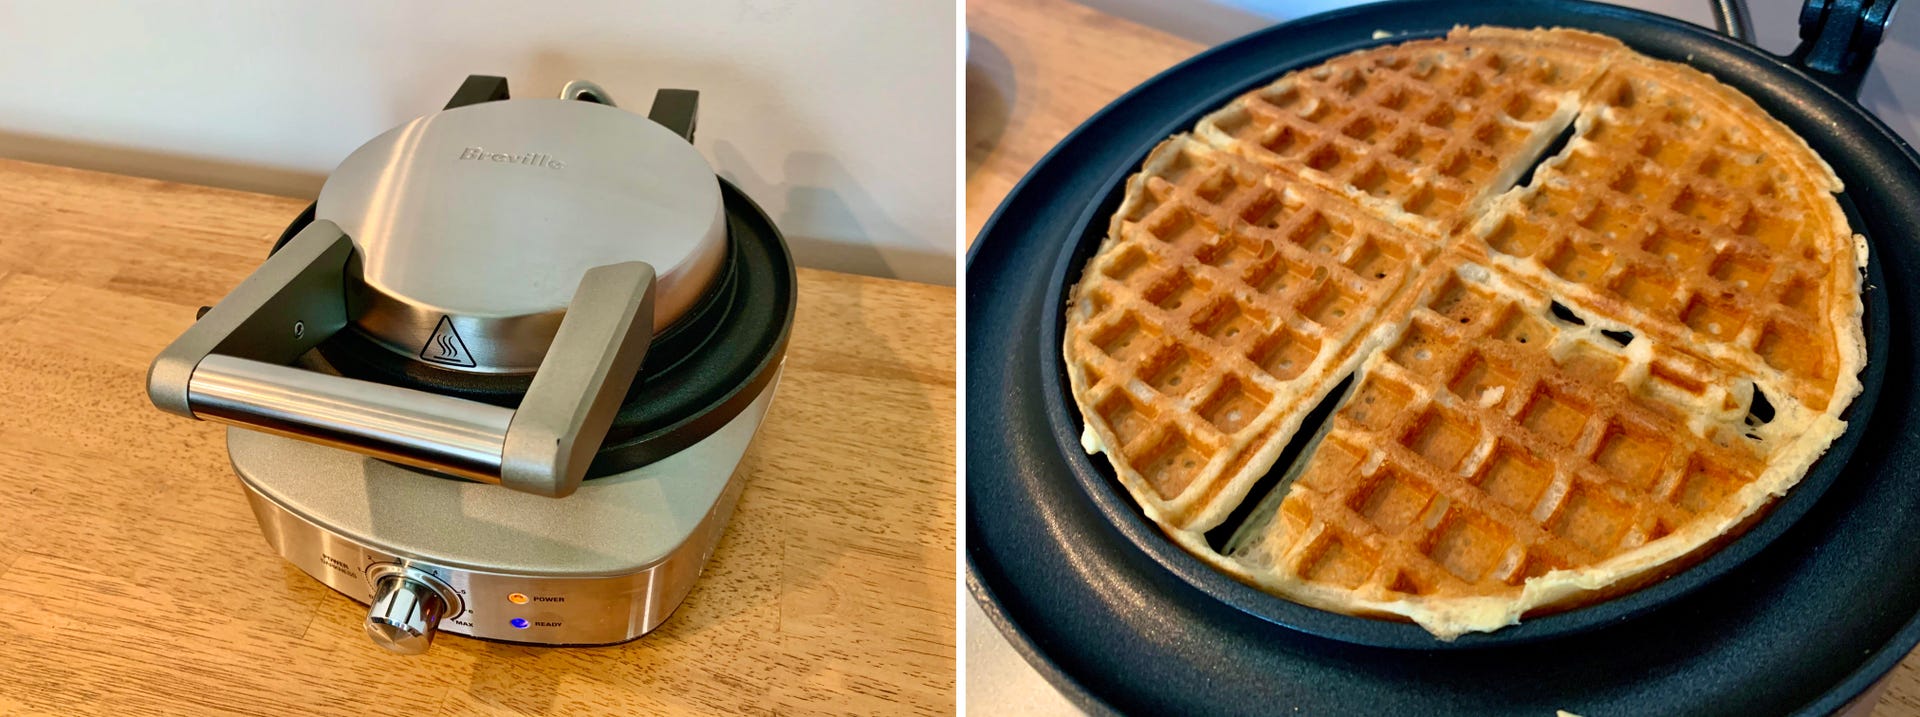 A closed stainless steel waffle maker/ A close-up shot of a plain waffle on in an open waffle maker.